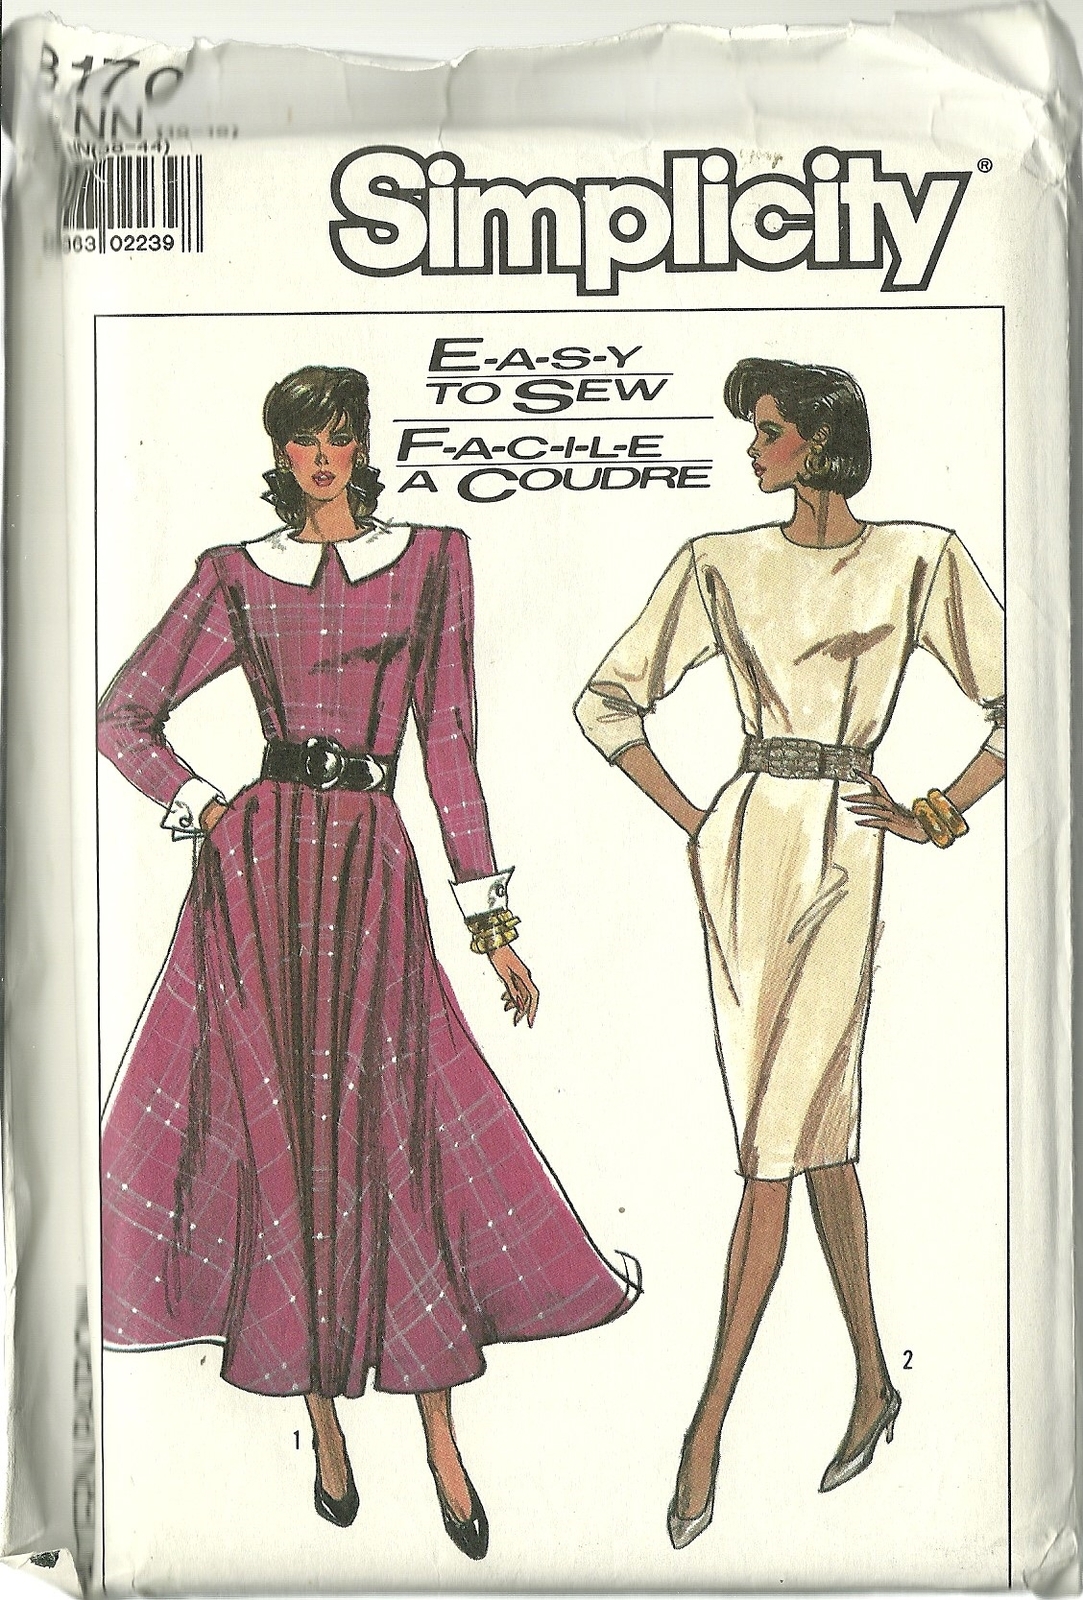 Simplicity Sewing Pattern 8170 Misses Womens Dress Size 10 12 14 16 New - $9.99